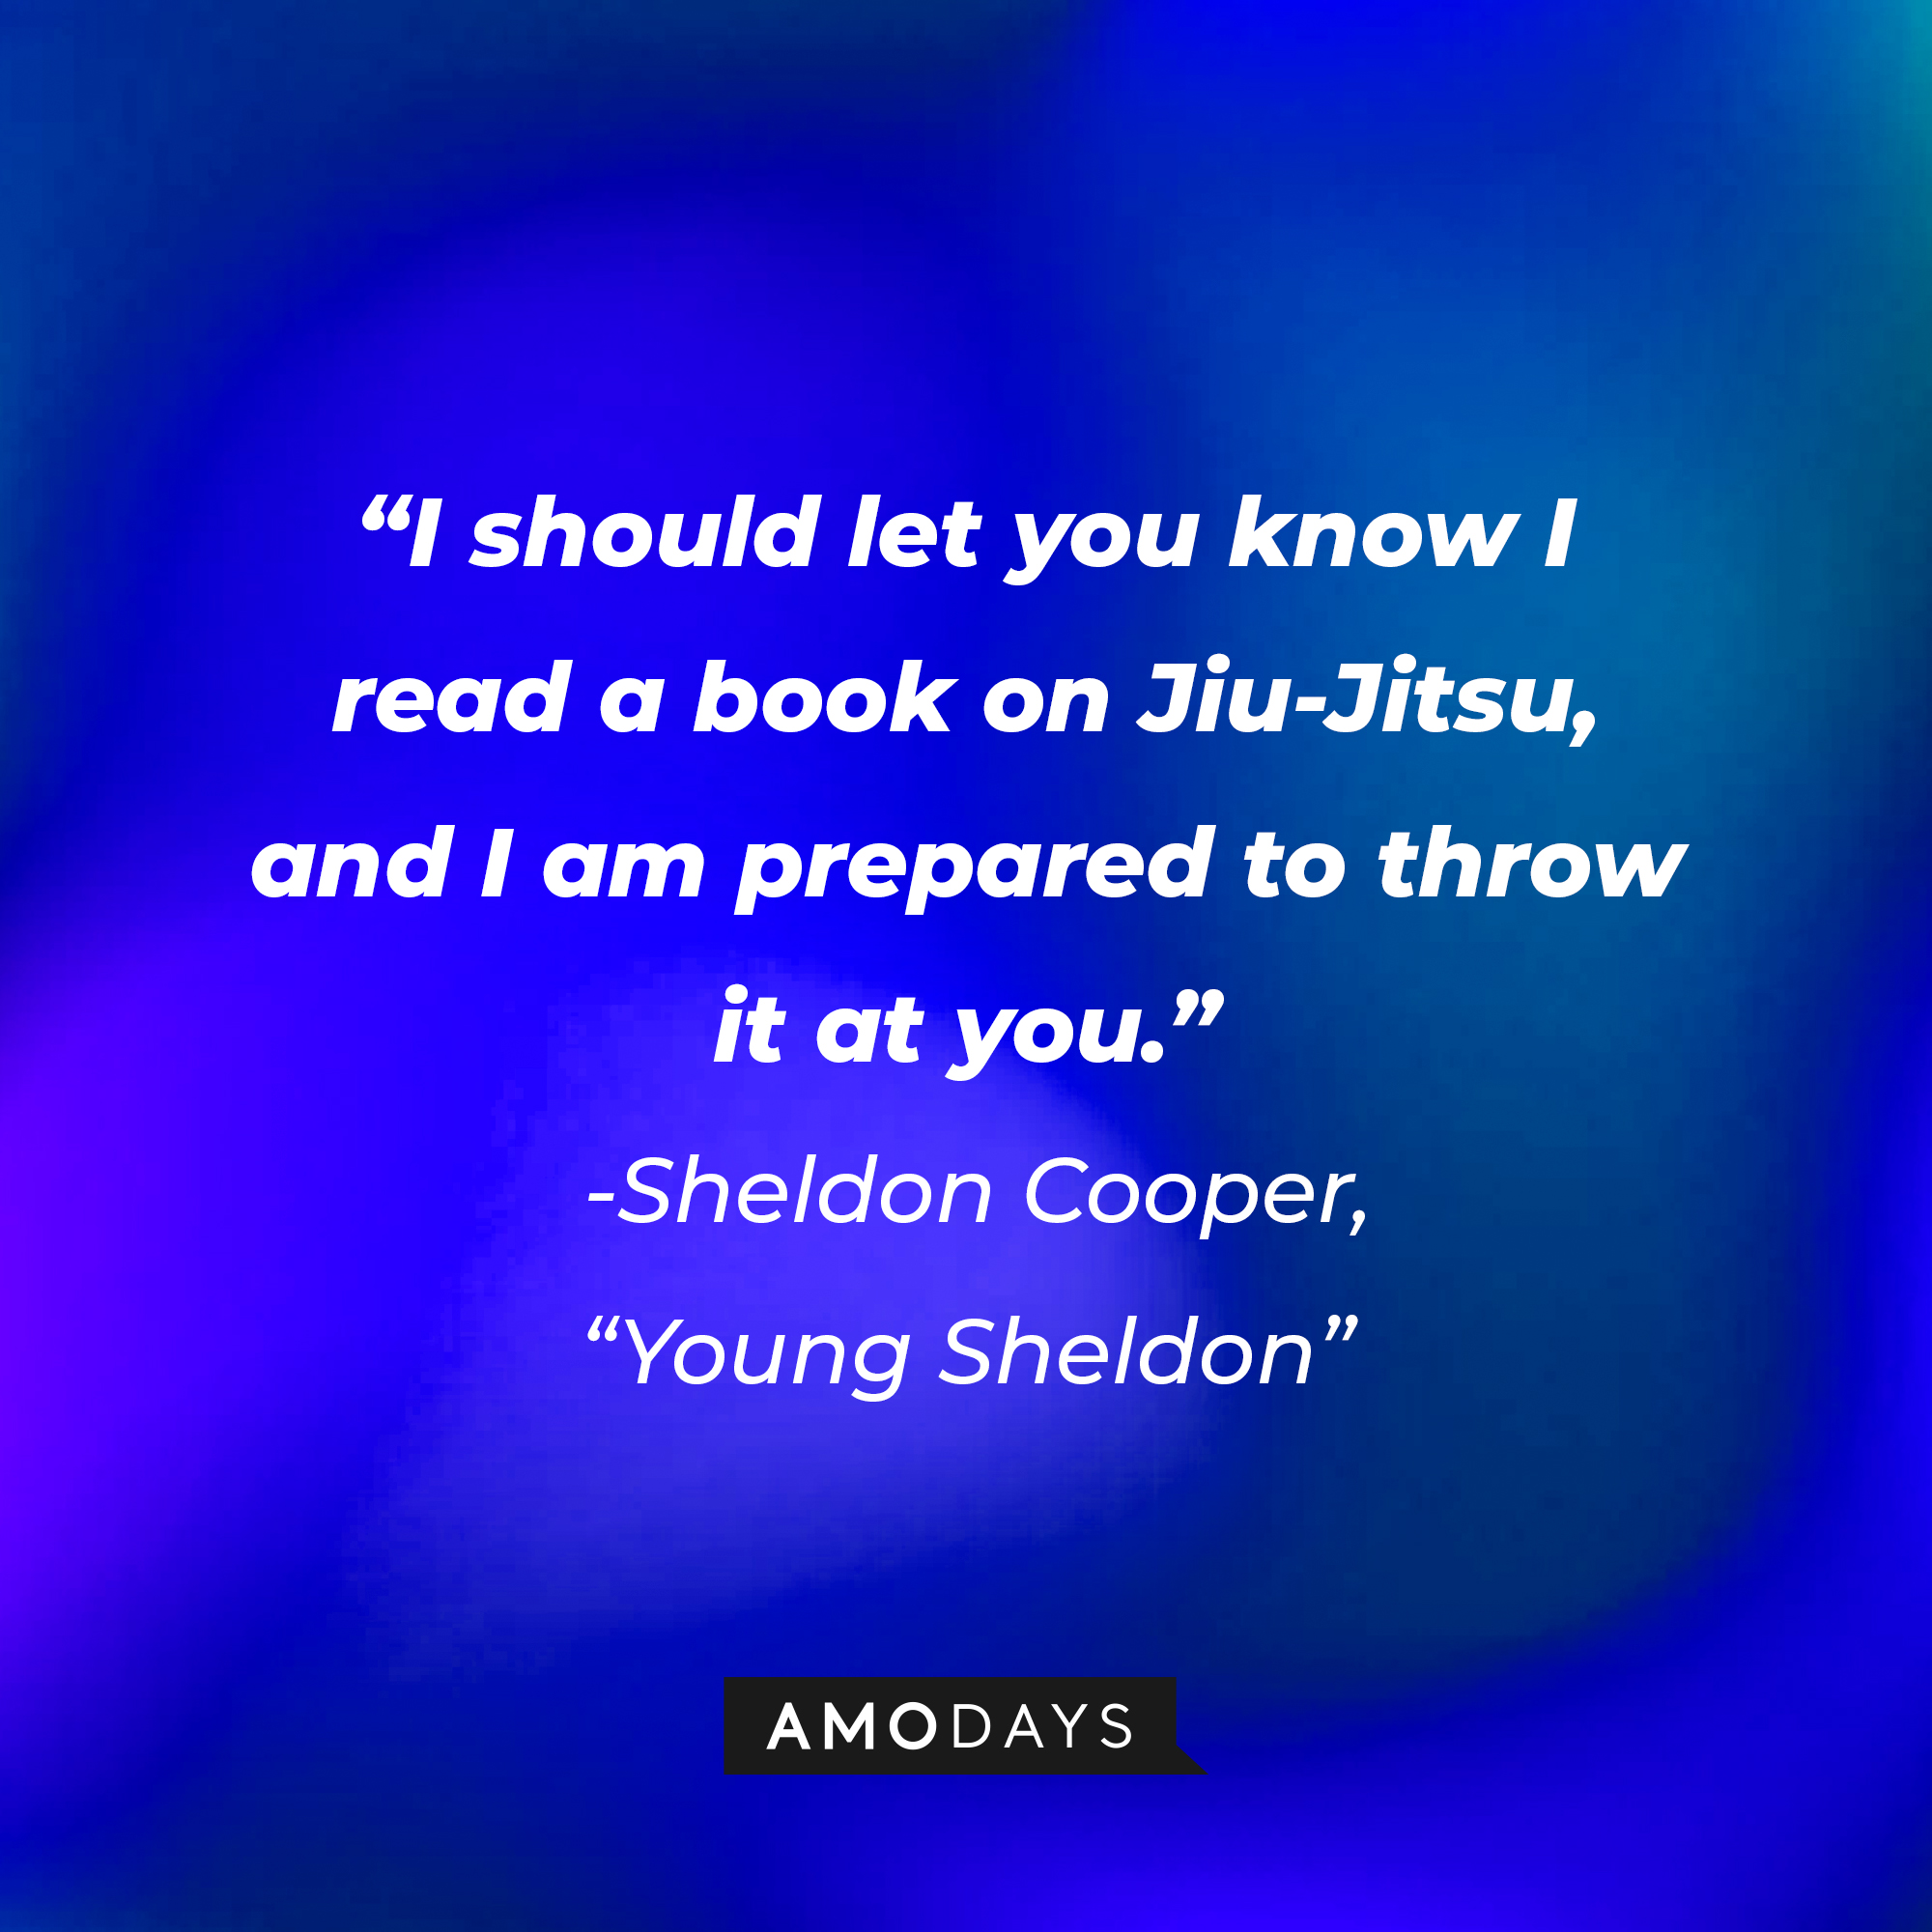 Sheldon Cooper's quote from "Young Sheldon": "I should let you know I read a book on Jiu-Jitsu, and I am prepared to throw it at you." | Source: Amodays